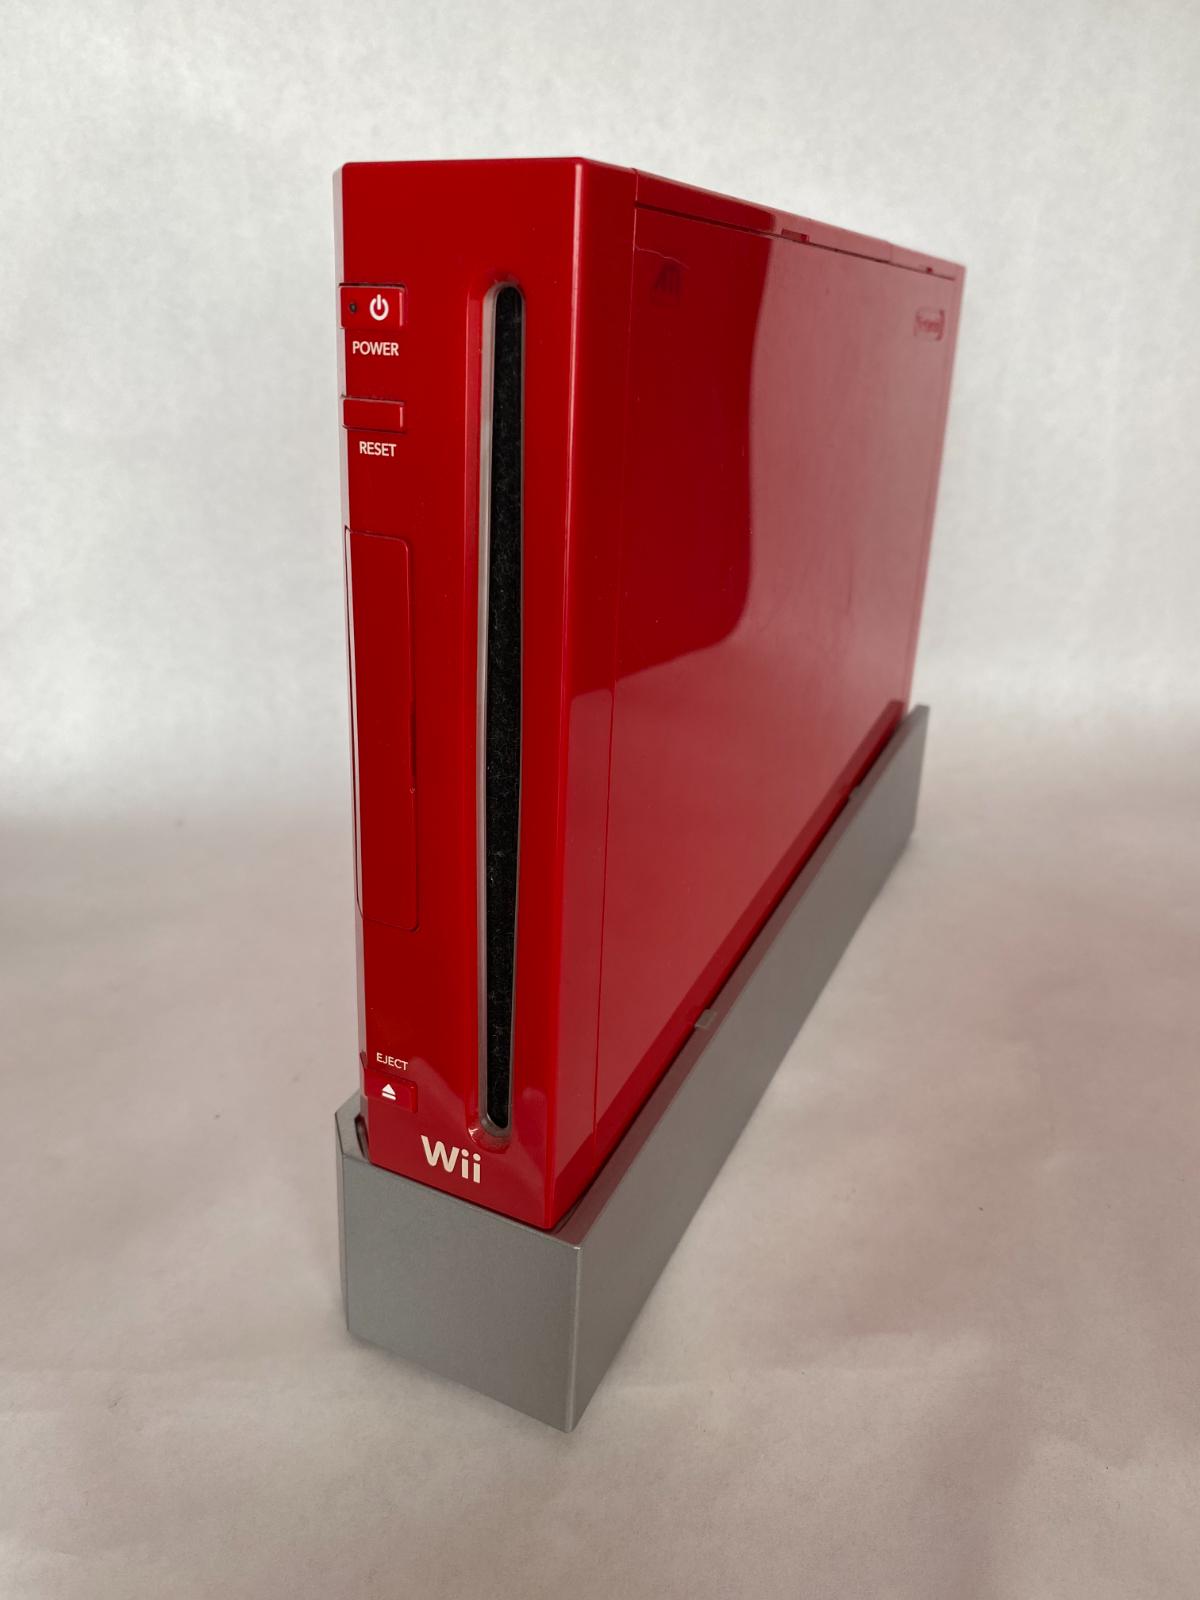 Kwik douche Spectaculair Red Nintendo Wii System | Item only | Wii